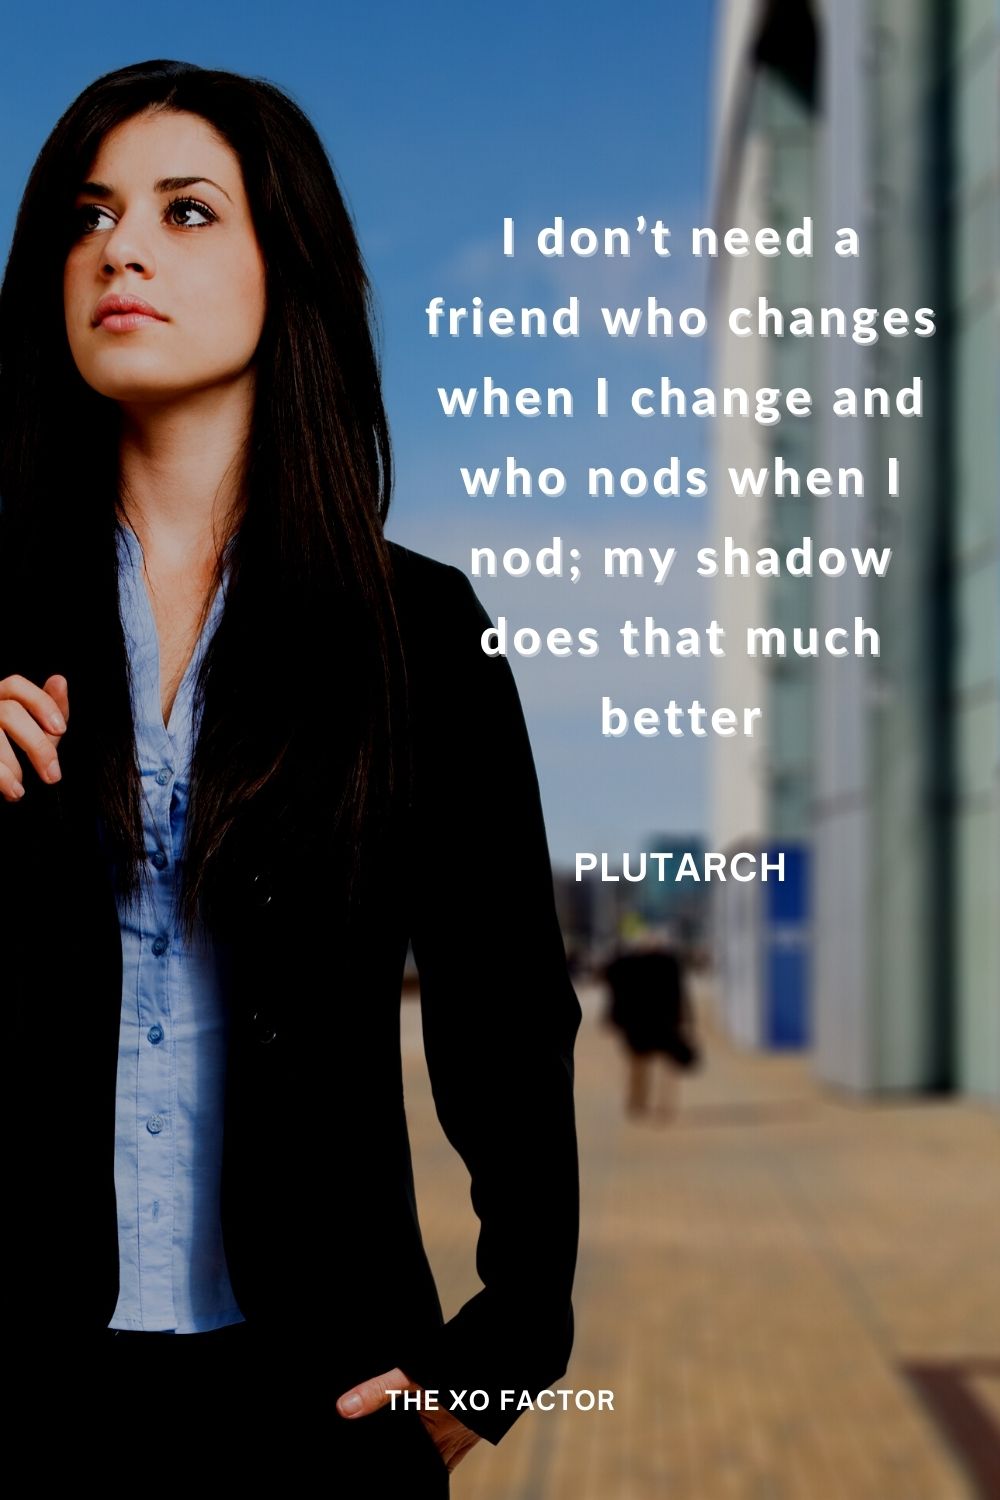 I don’t need a friend who changes when I change and who nods when I nod; my shadow does that much better Plutarch